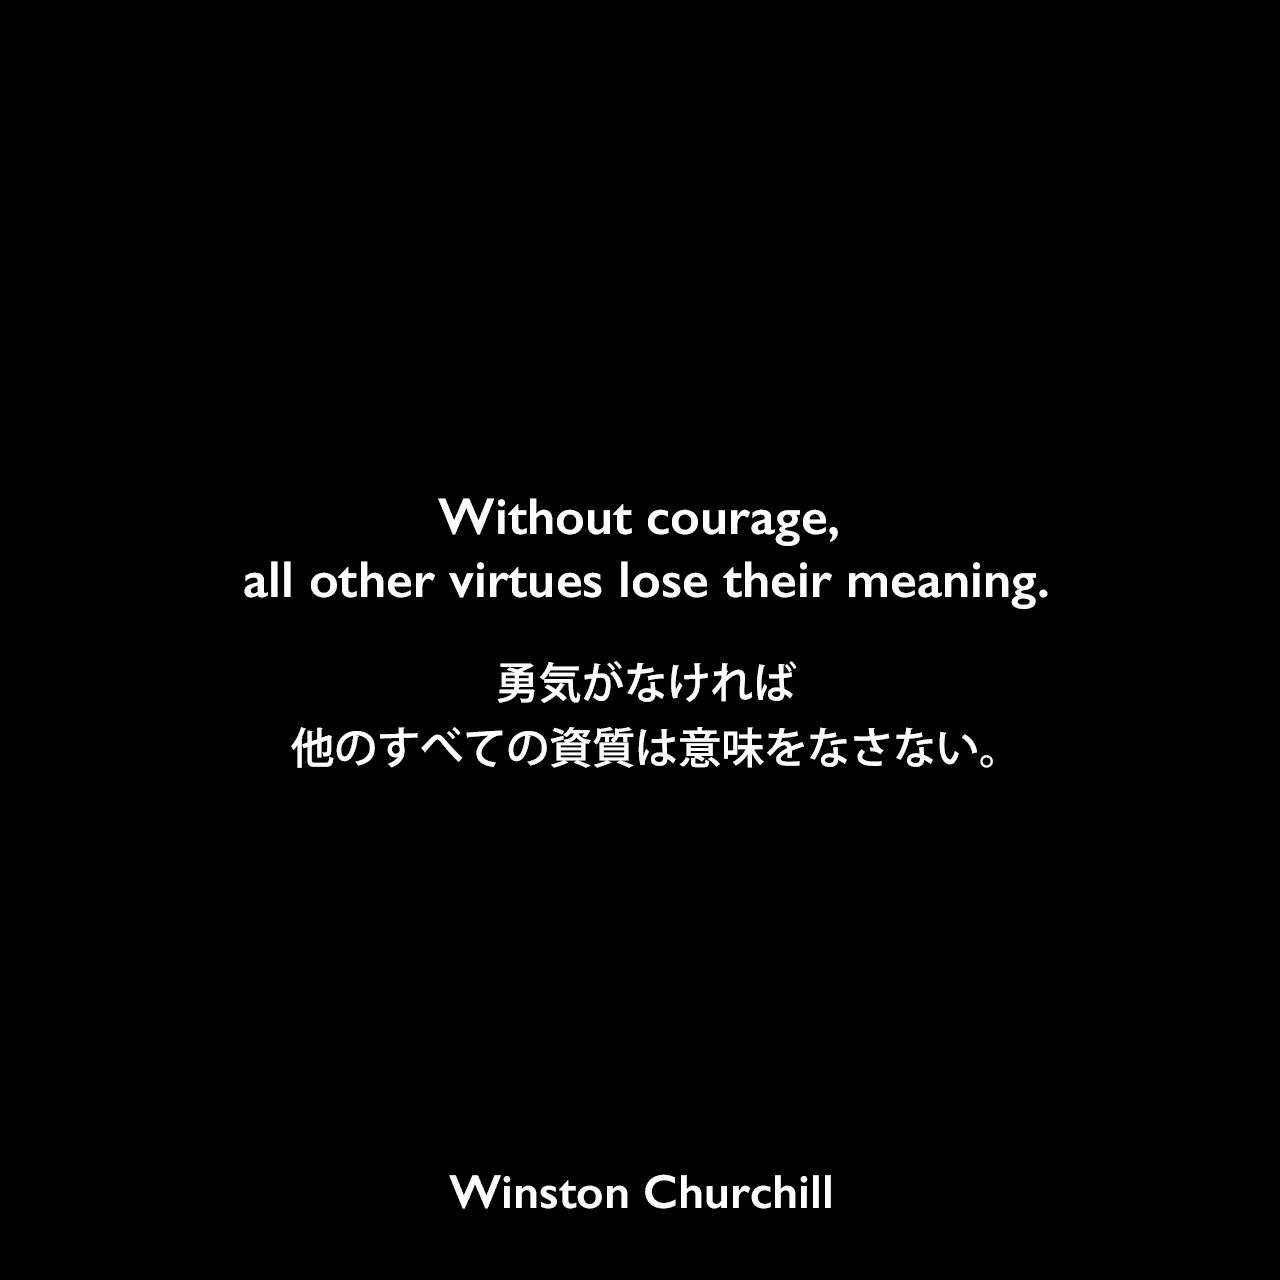 Without courage, all other virtues lose their meaning.勇気がなければ、他のすべての資質は意味をなさない。Winston Churchill